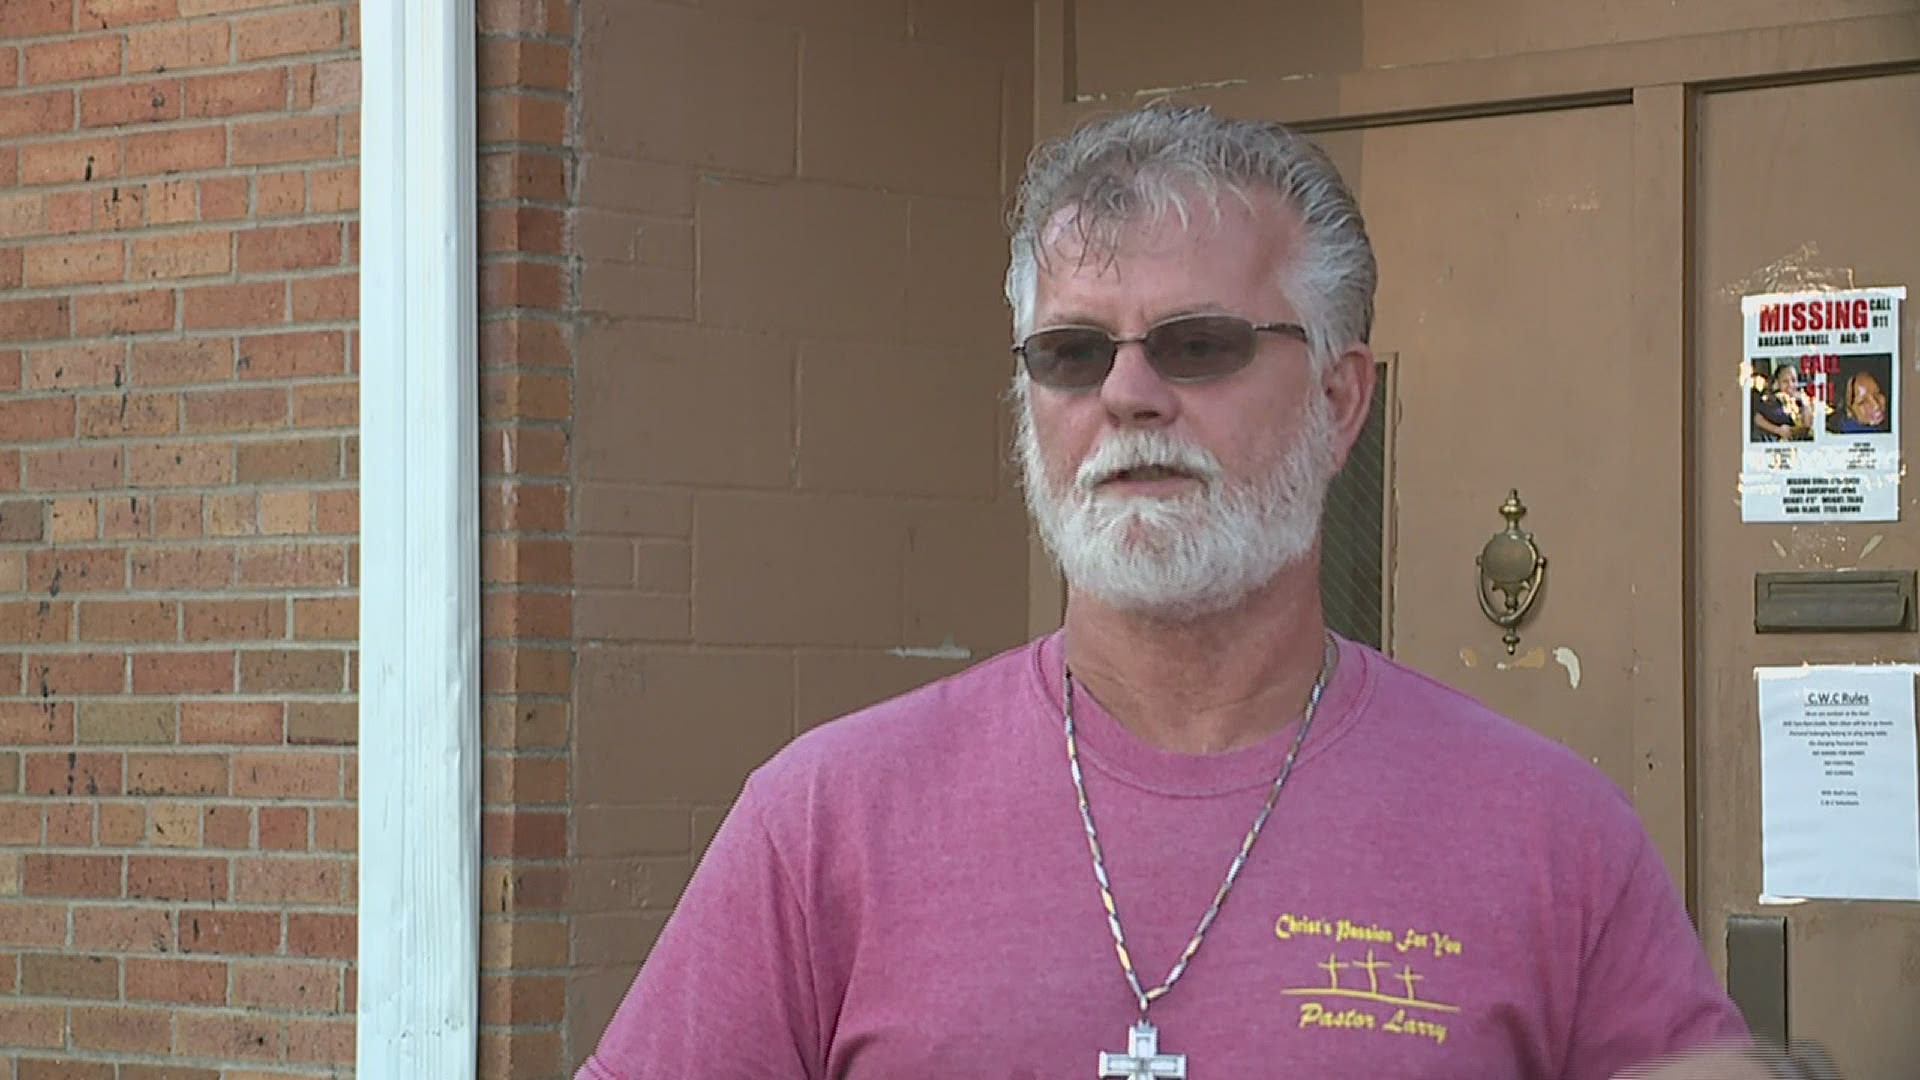 Pastor Larry Thomas has been cooking up eggs and pancakes for five years for those staying at shelters or sleeping on the streets in Davenport.